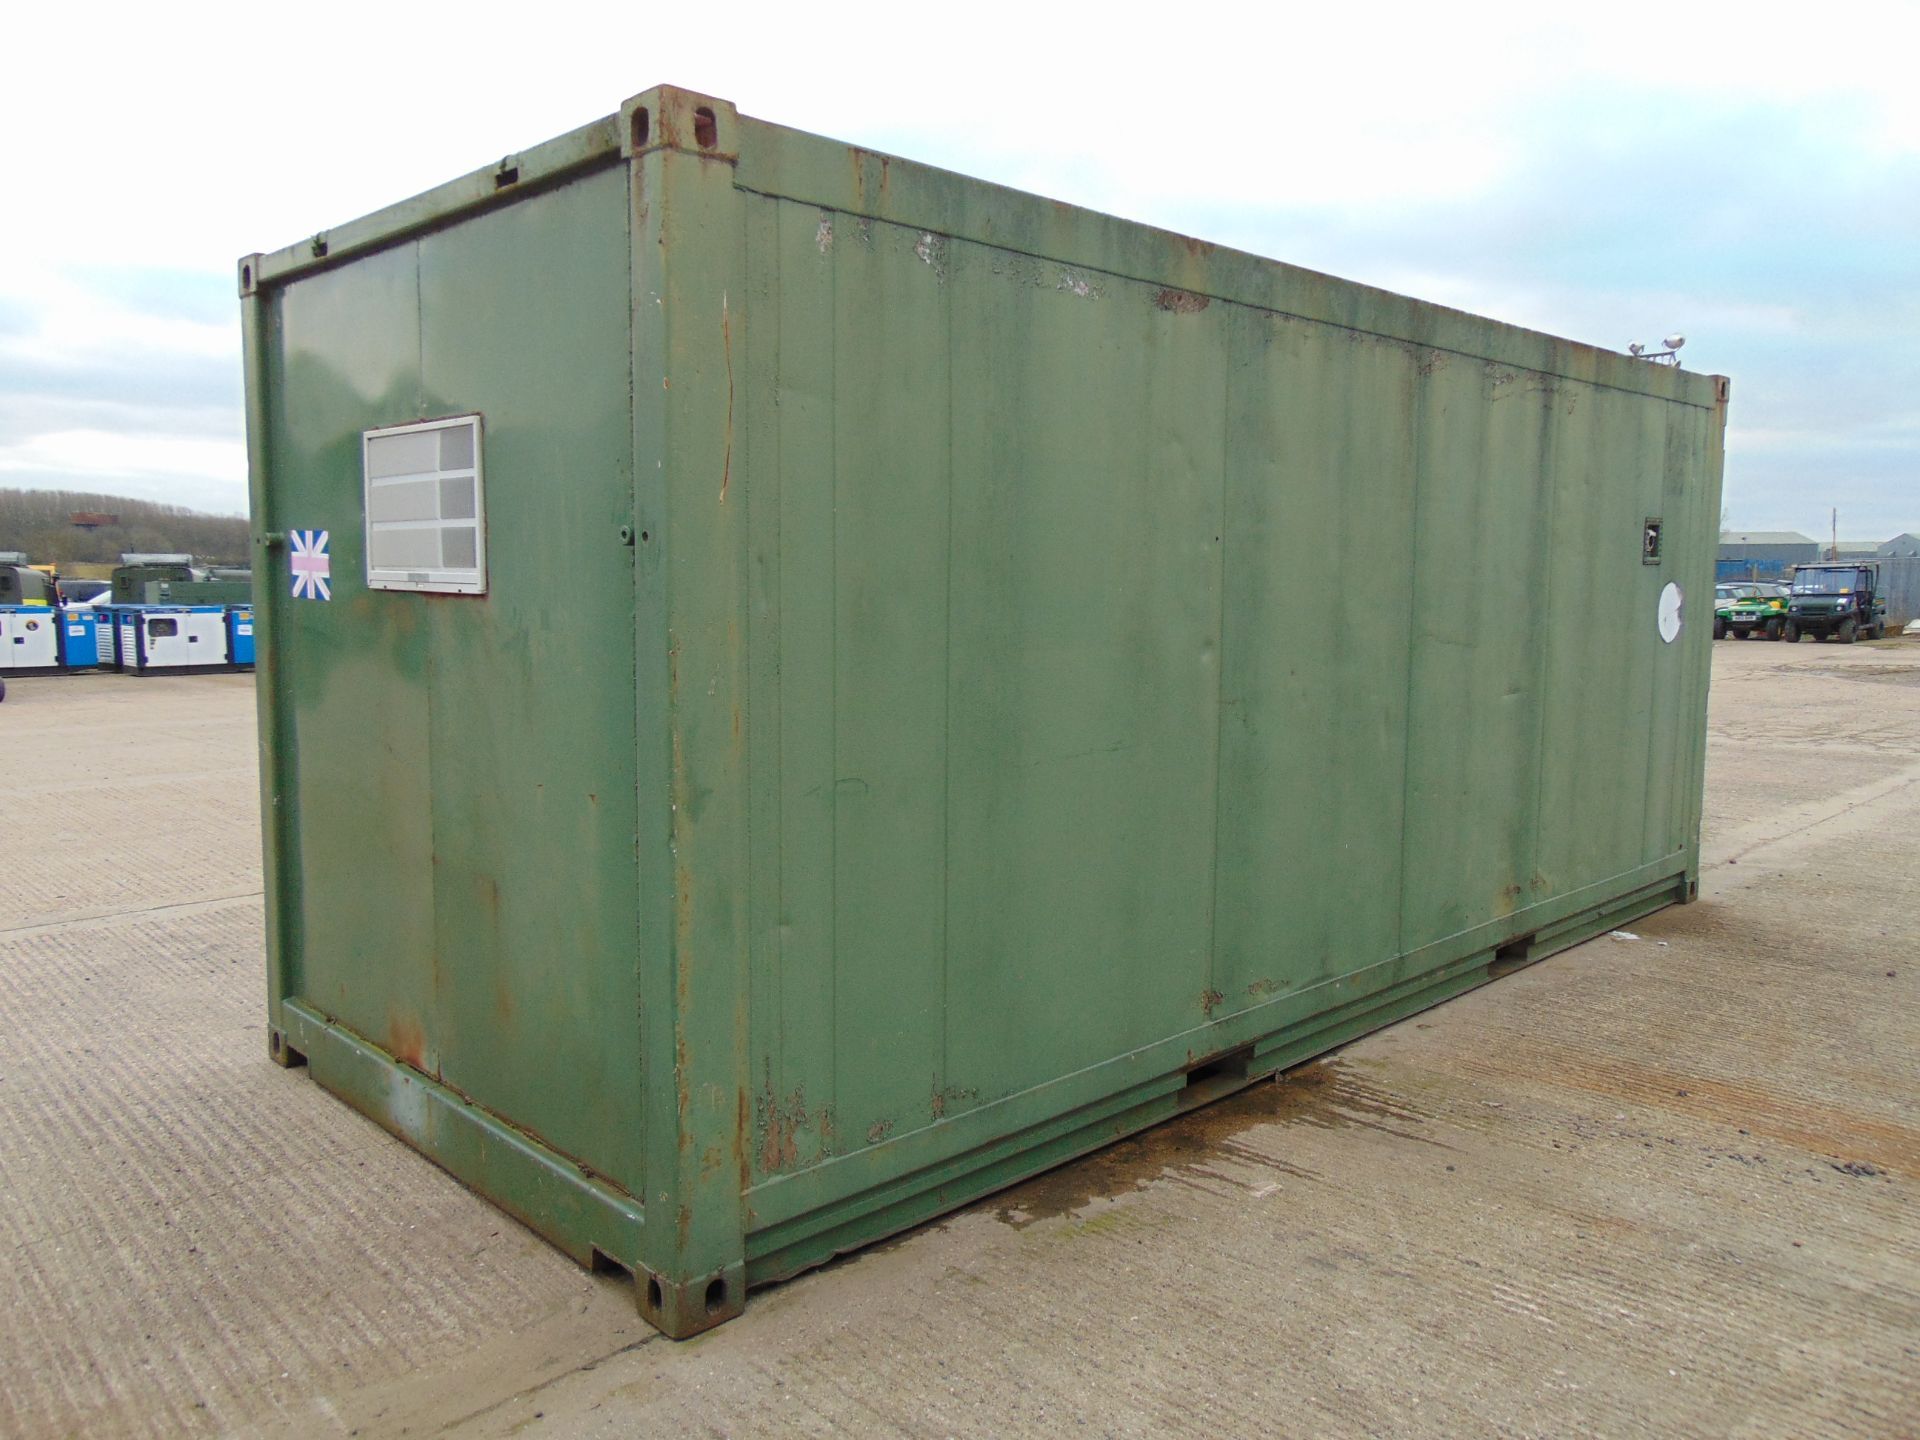 20' ISO Shipping Container C/W Stainless Steel Interior Lining, A/C, Roller Shutter Door etc - Image 18 of 18